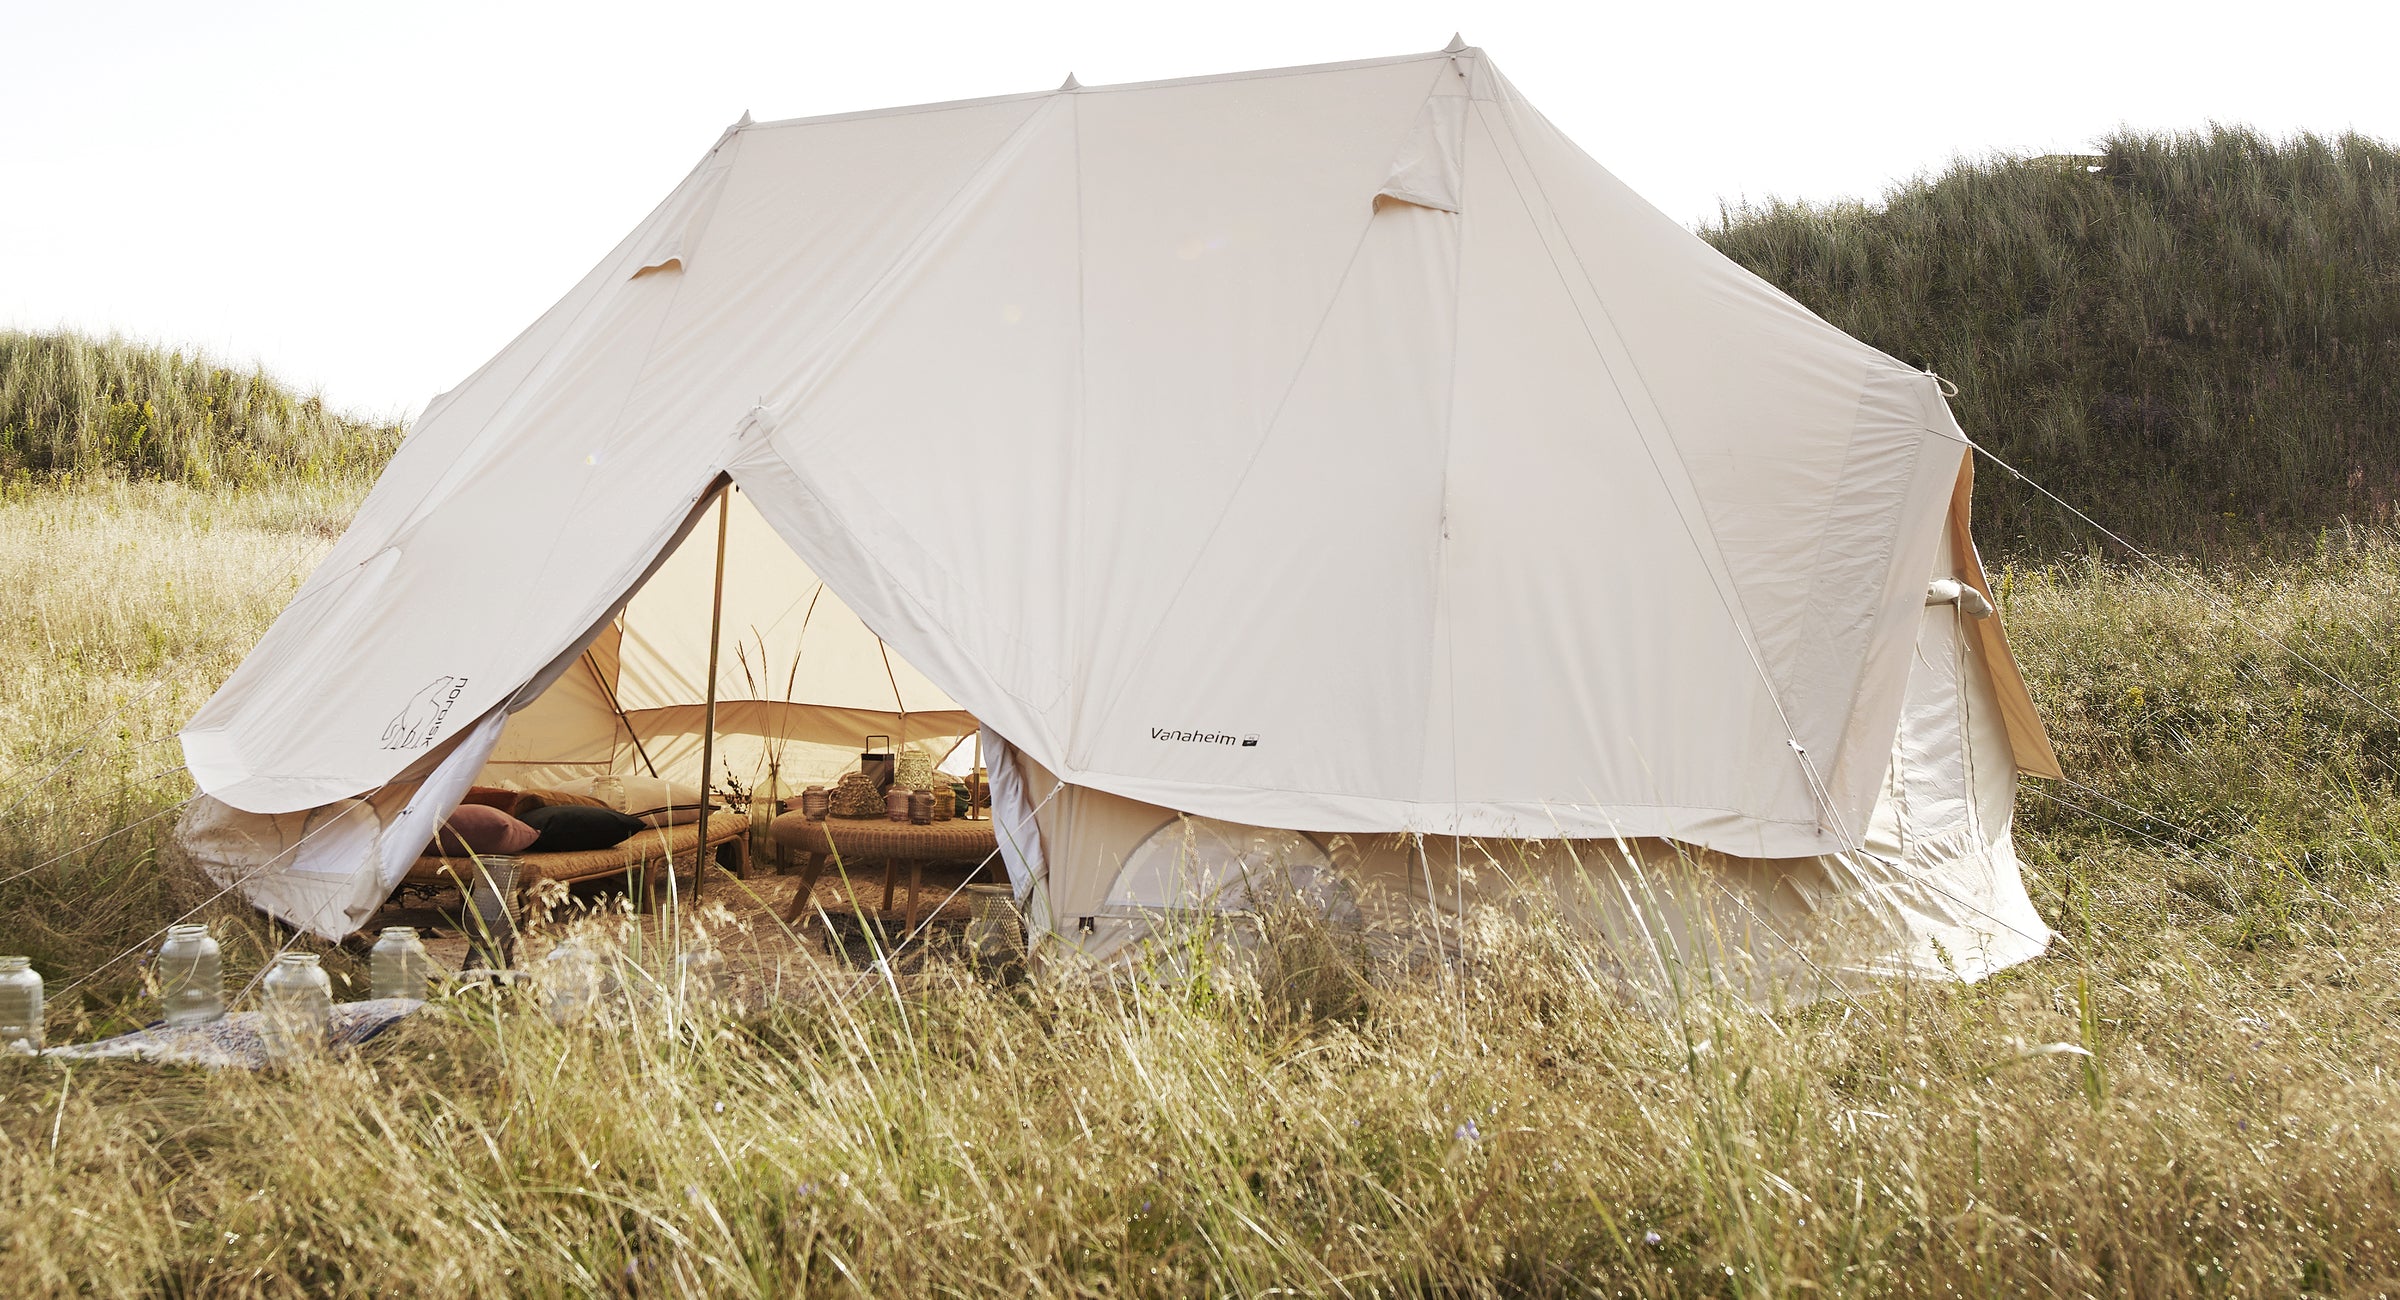 GLAMPING - A global trend